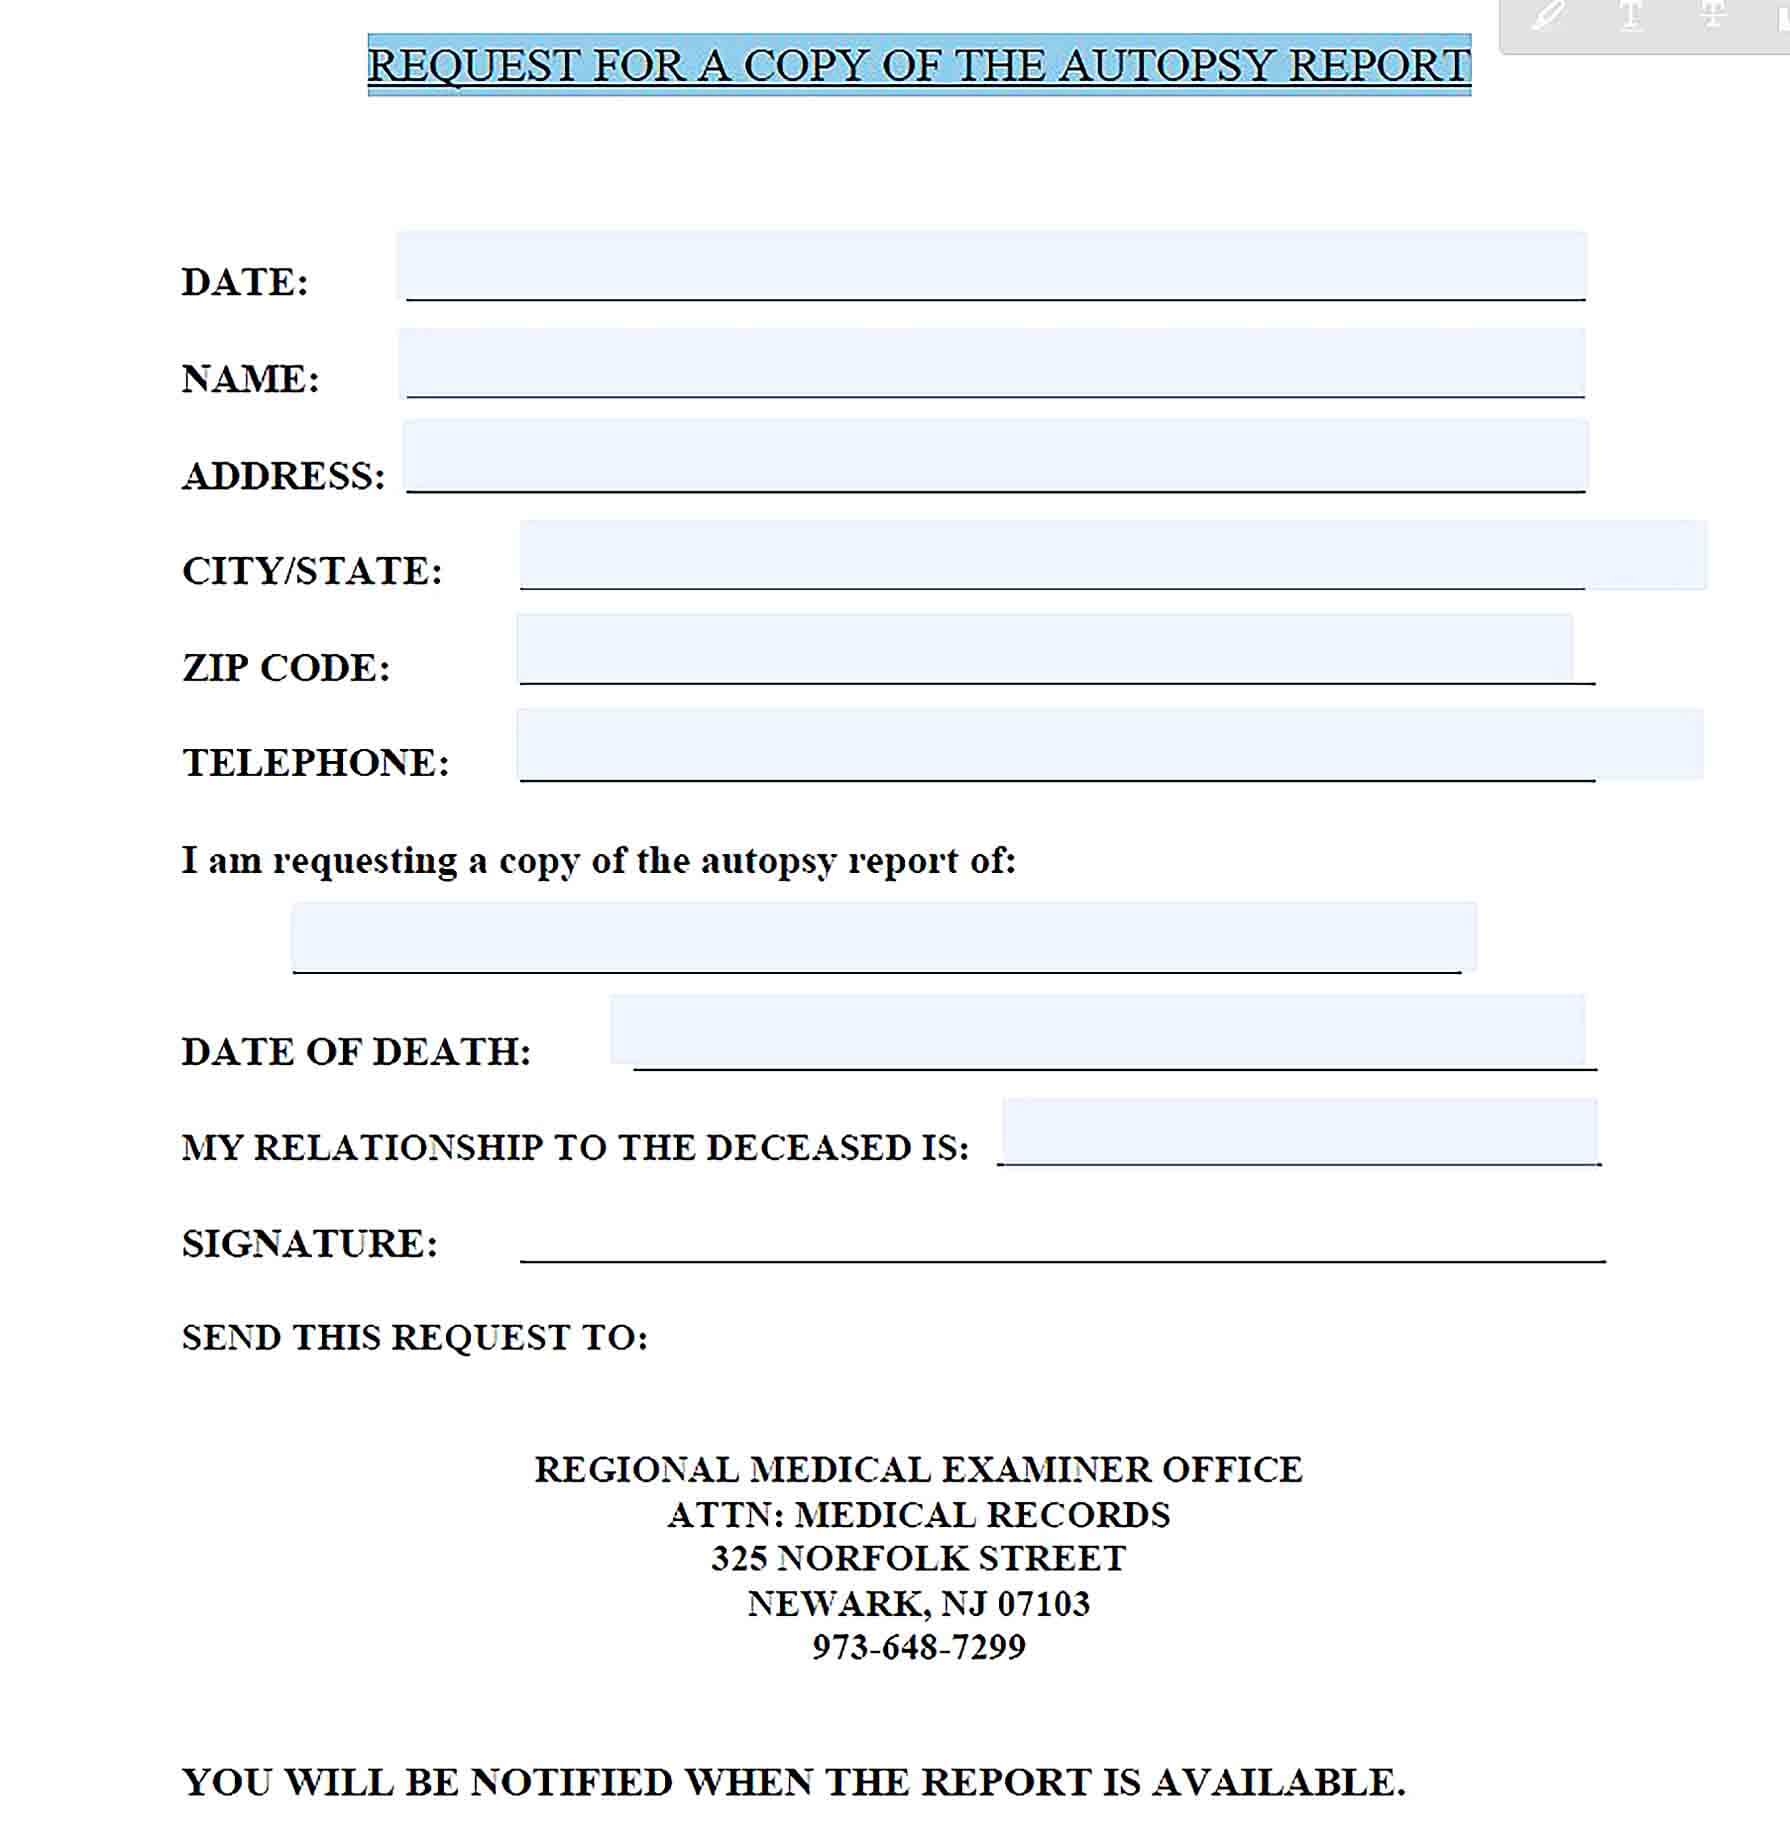 Sample Request for Autopsy Report Template